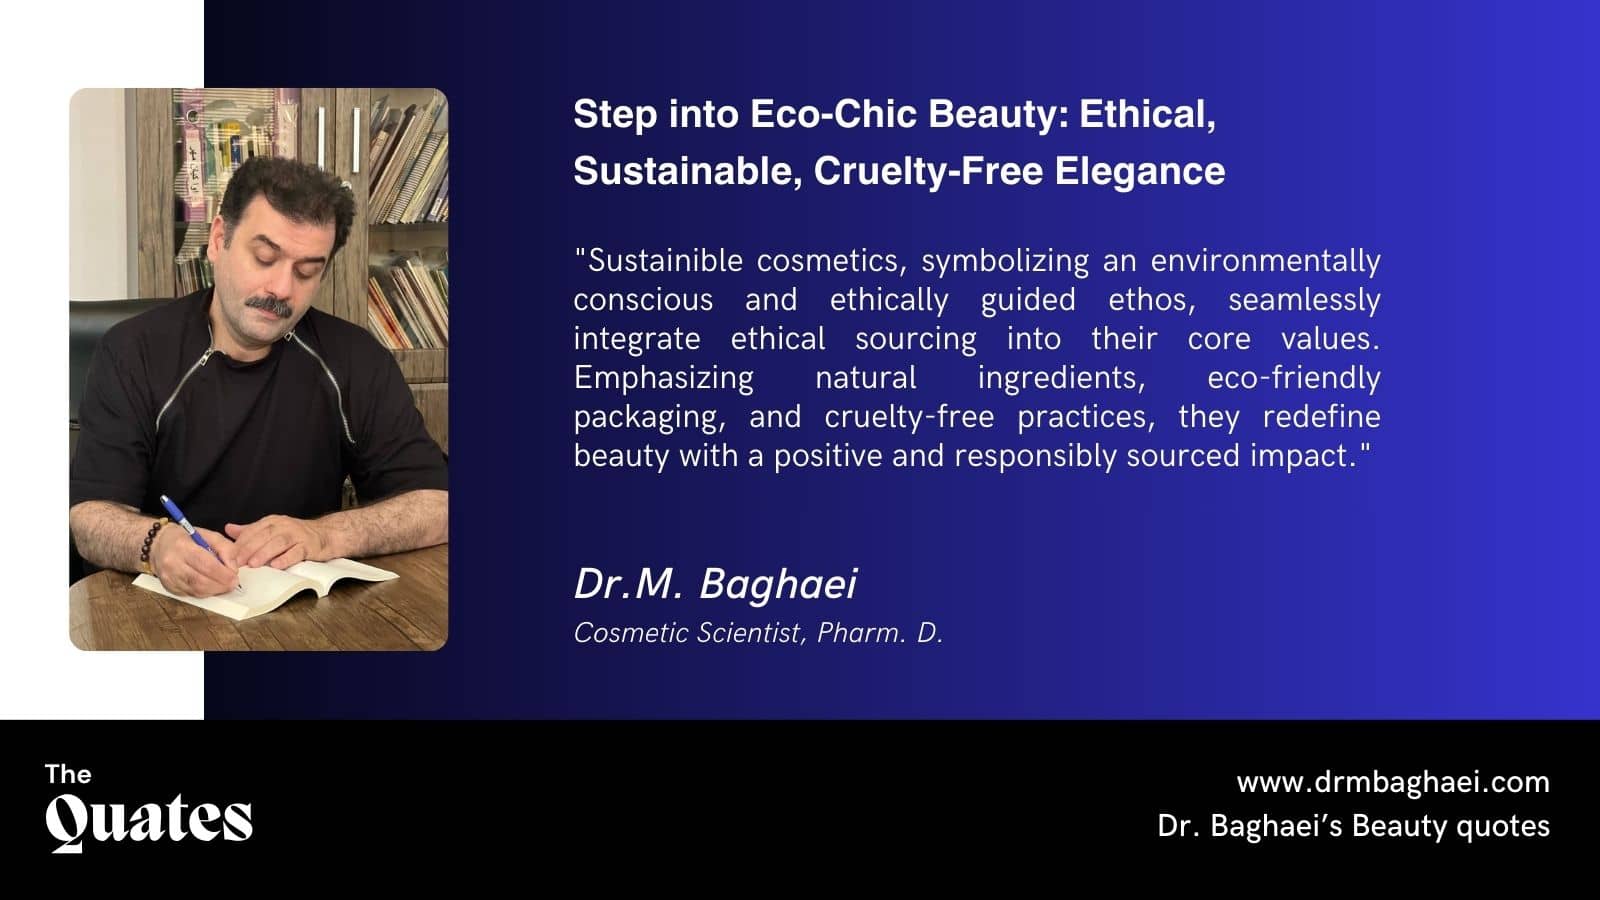 tep into Eco-Chic Beauty